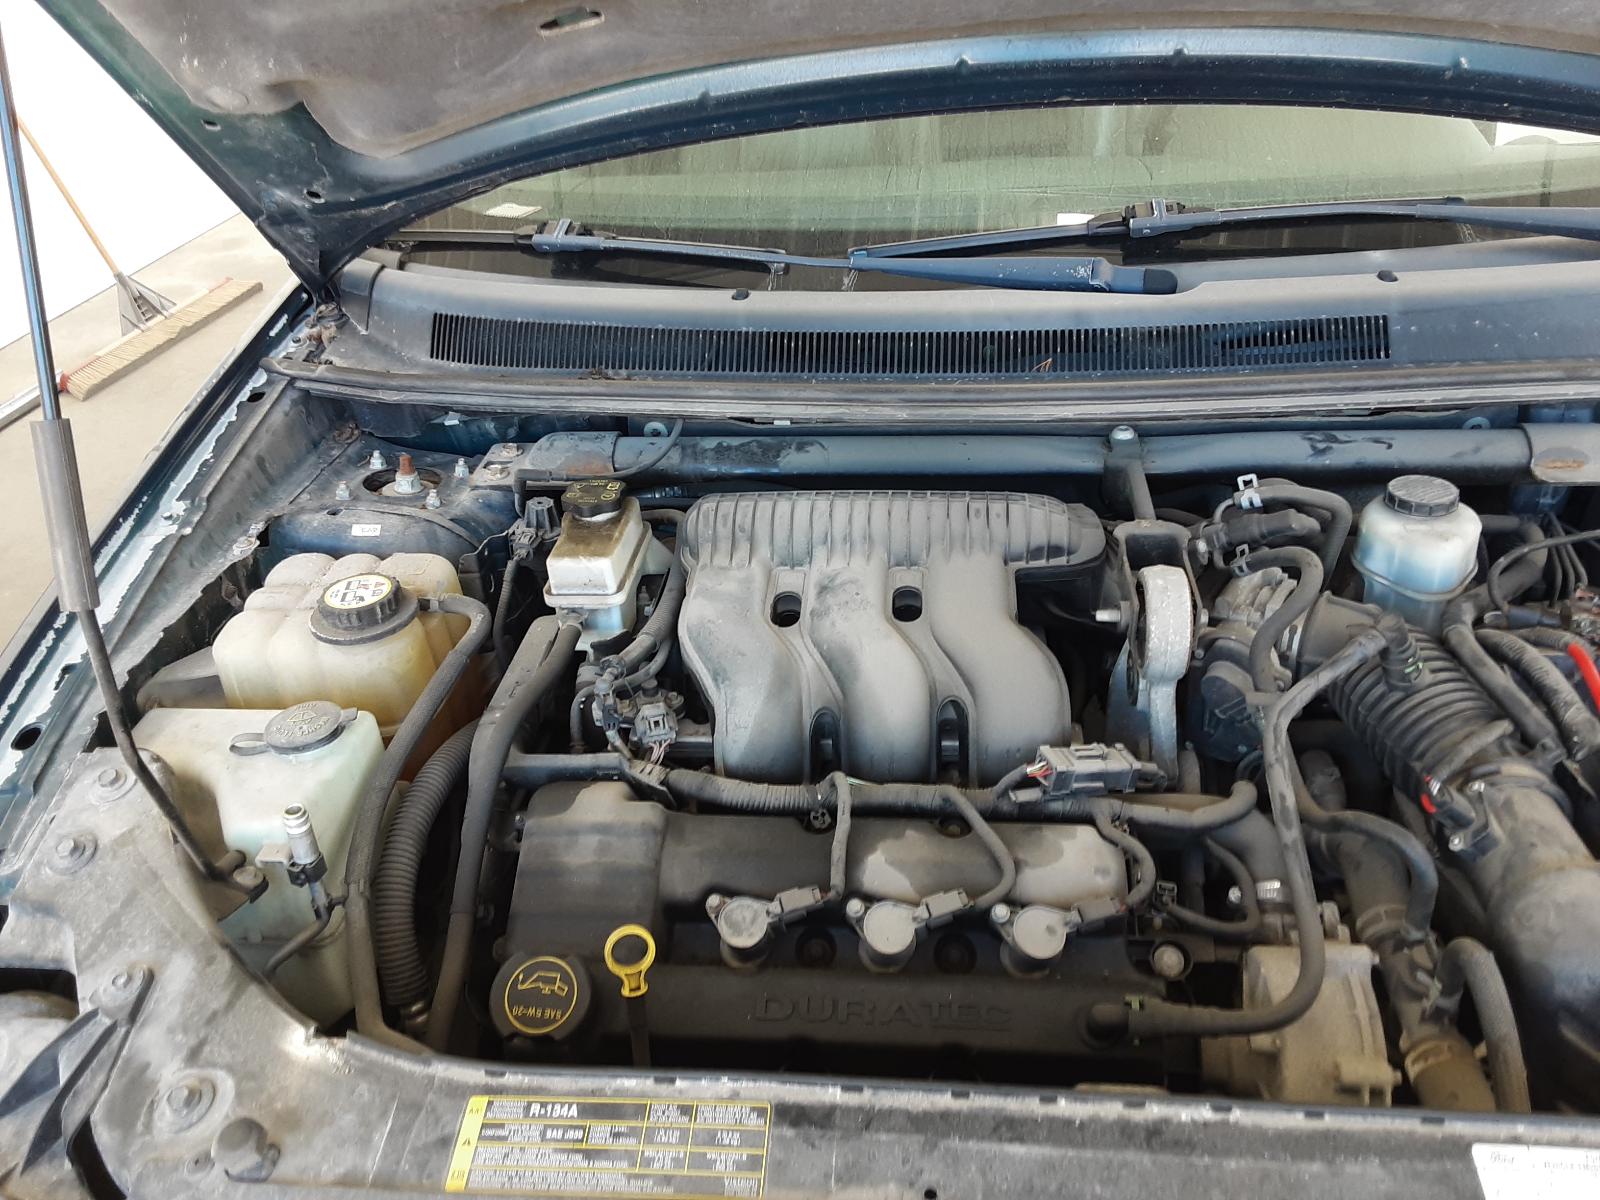 Used 2006 FORD FREESTYLE ENGINE - Waterloo Auto Parts